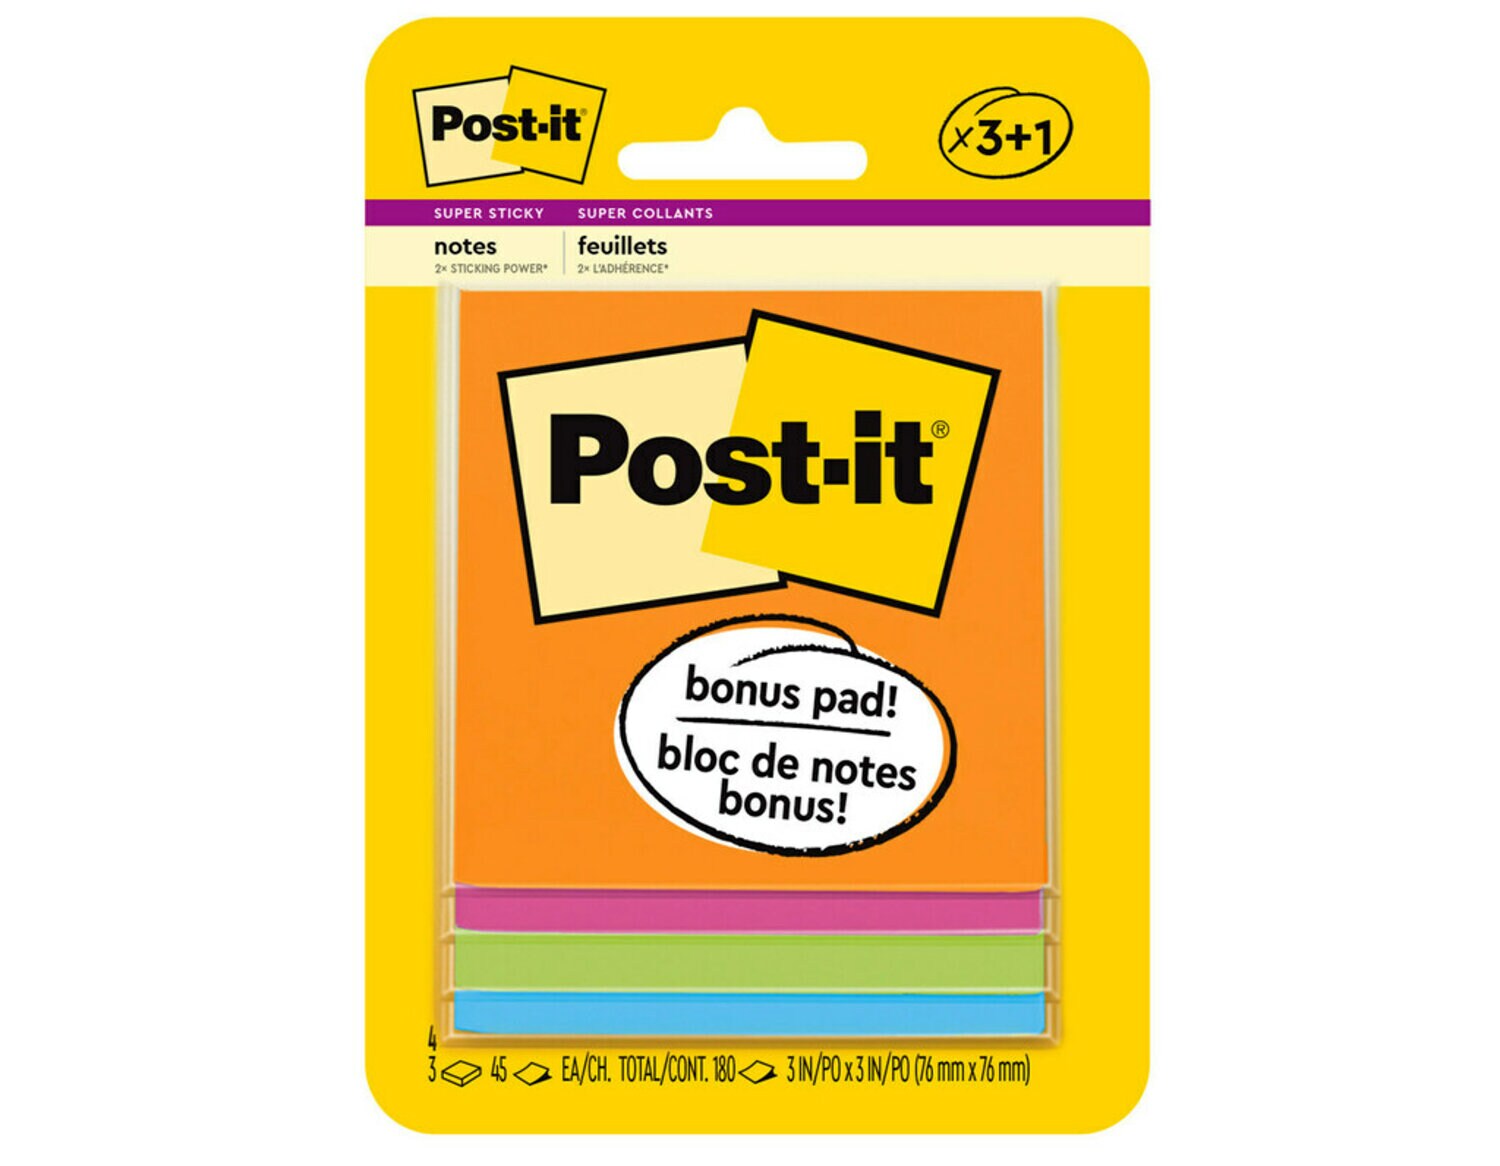 7010332971 - Post-it Super Sticky Notes, 3321-SSAU-B, 3 in x 3 in (76 mm x 76 mm),
Rio de Janeiro colors